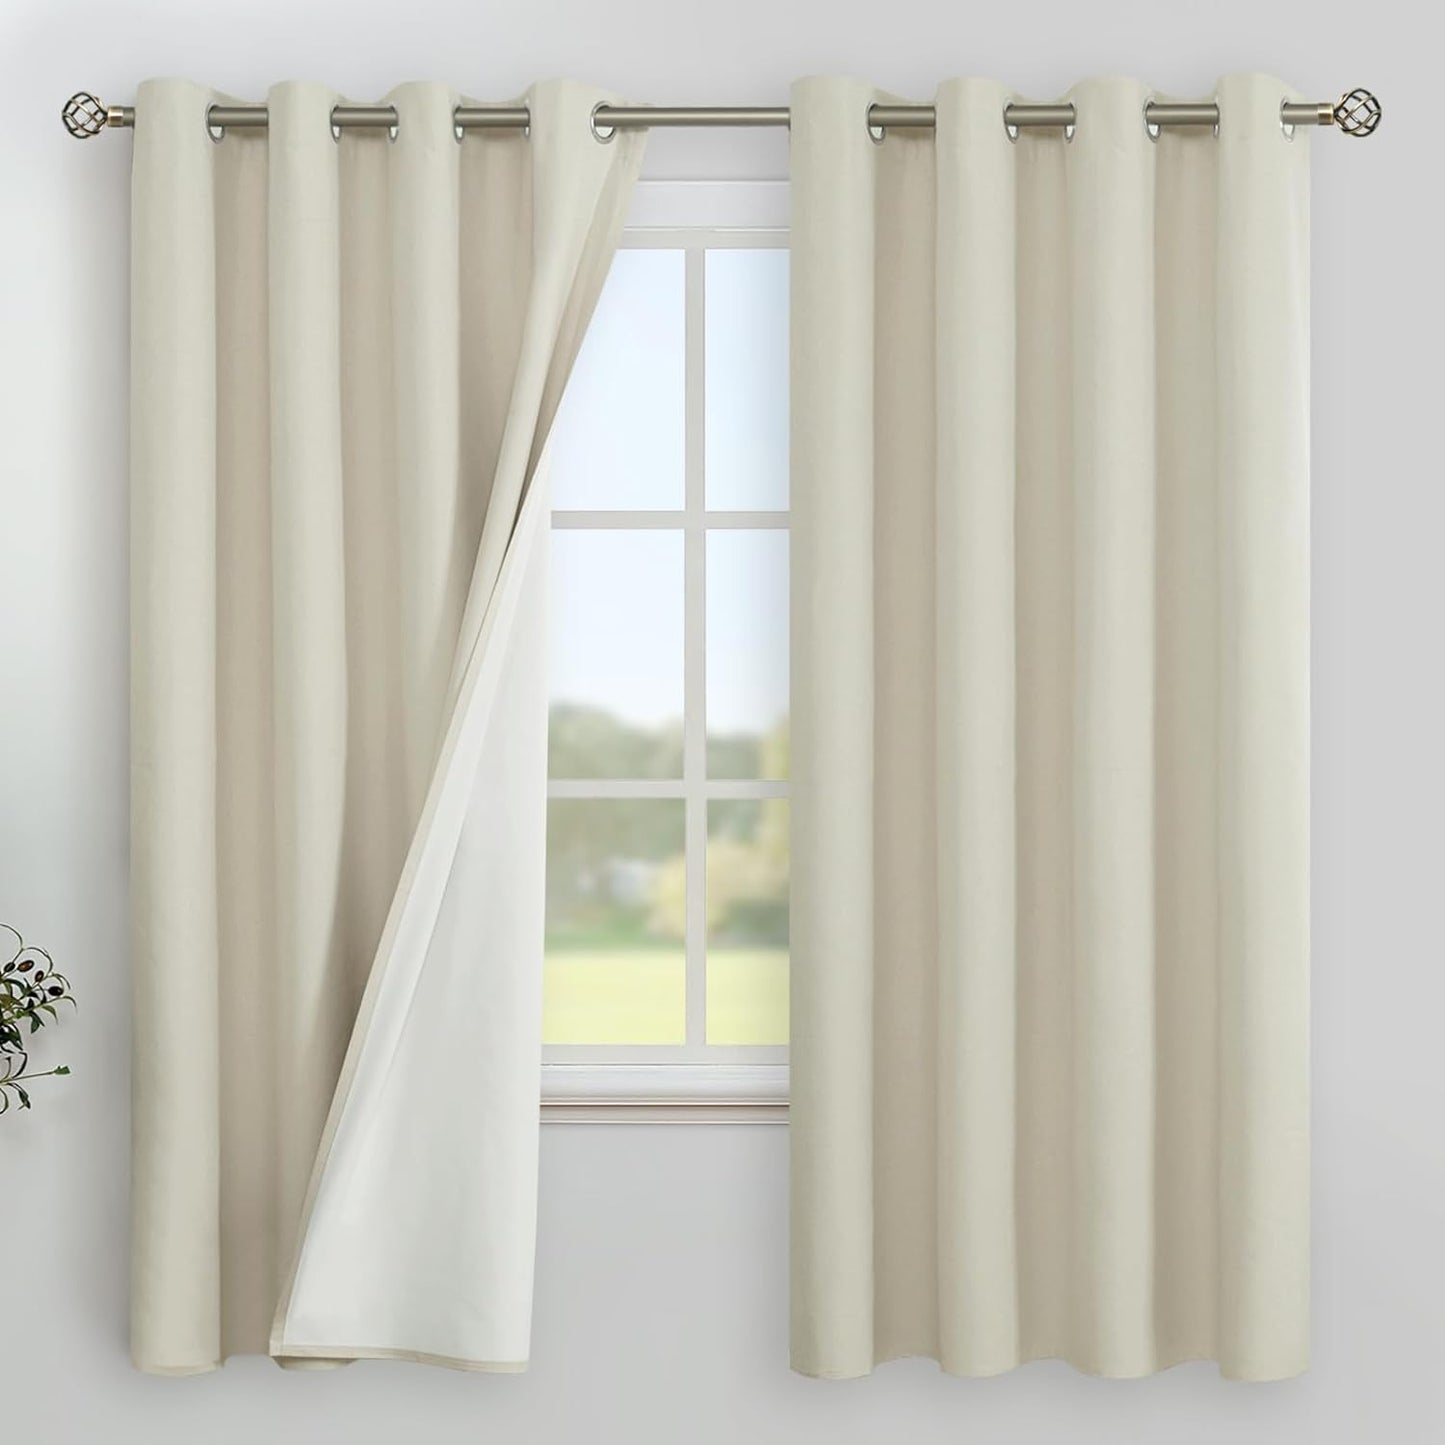 Youngstex Linen Blackout Curtains 63 Inches Long, Grommet Full Room Darkening Linen Window Drapes Thermal Insulated for Living Room Bedroom, 2 Panels, 52 X 63 Inch, Linen  YoungsTex Cream 52W X 63L 